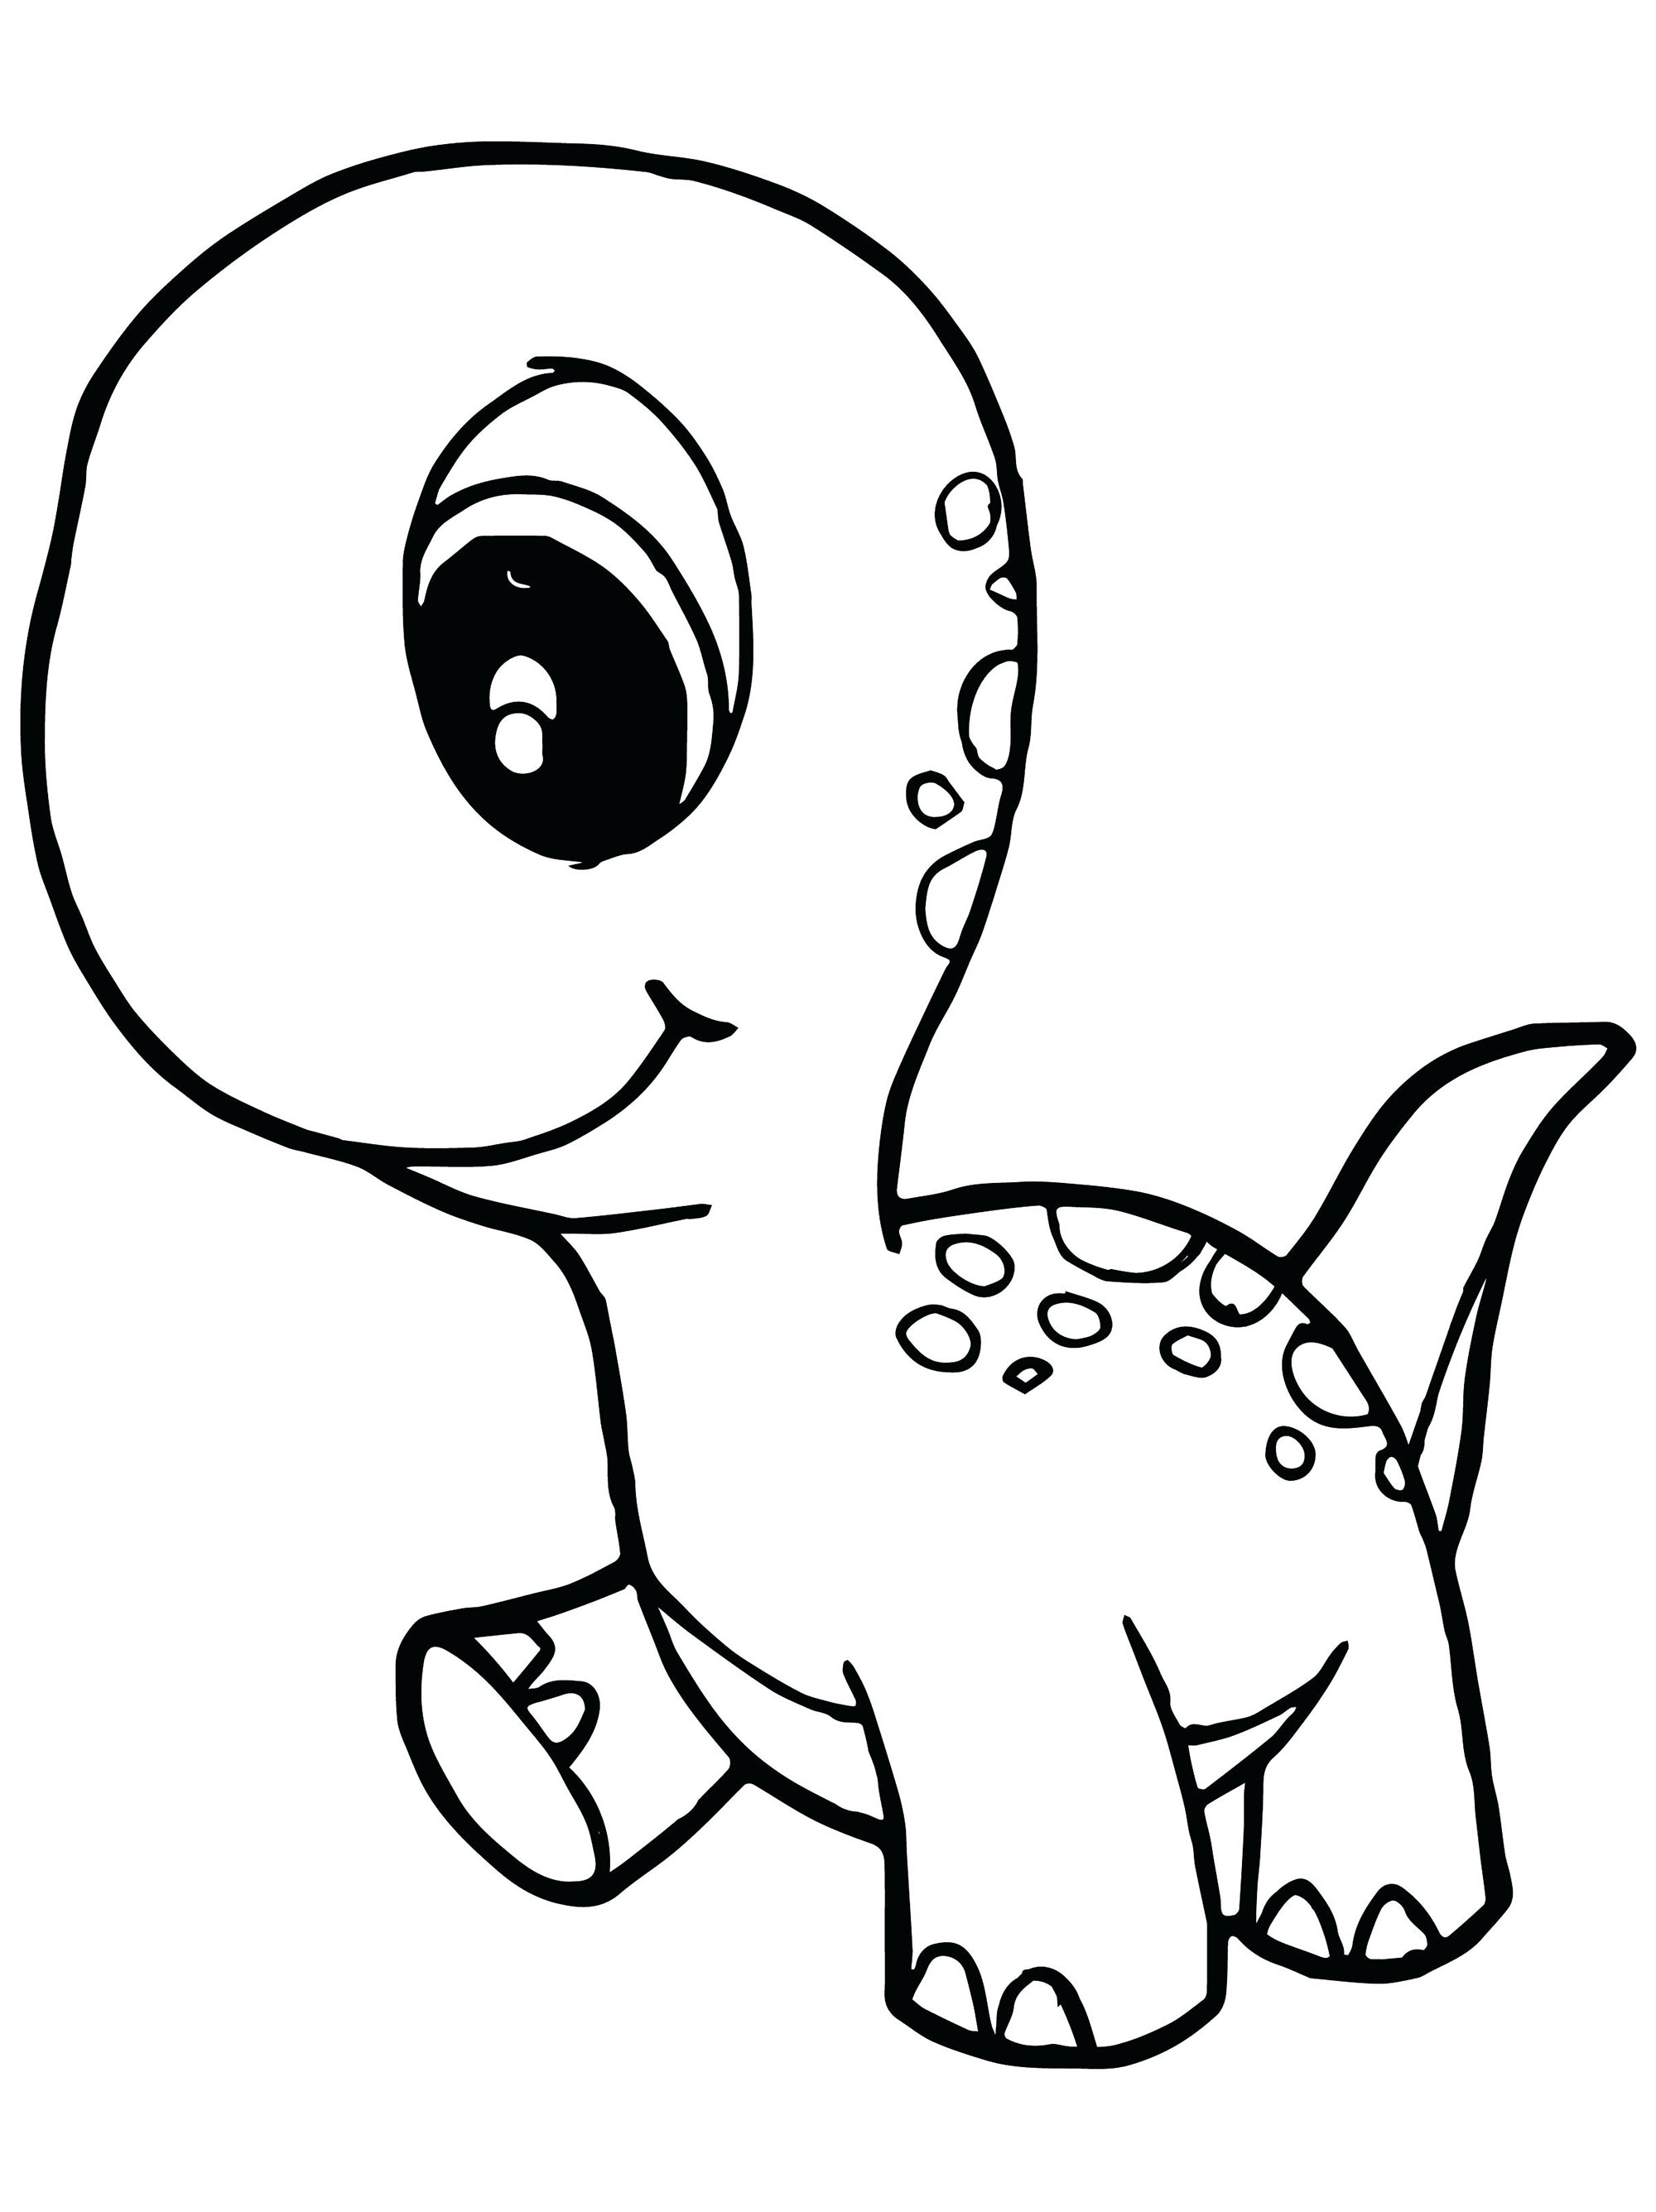 small-dinosaur-dinosaurs-kids-coloring-pages